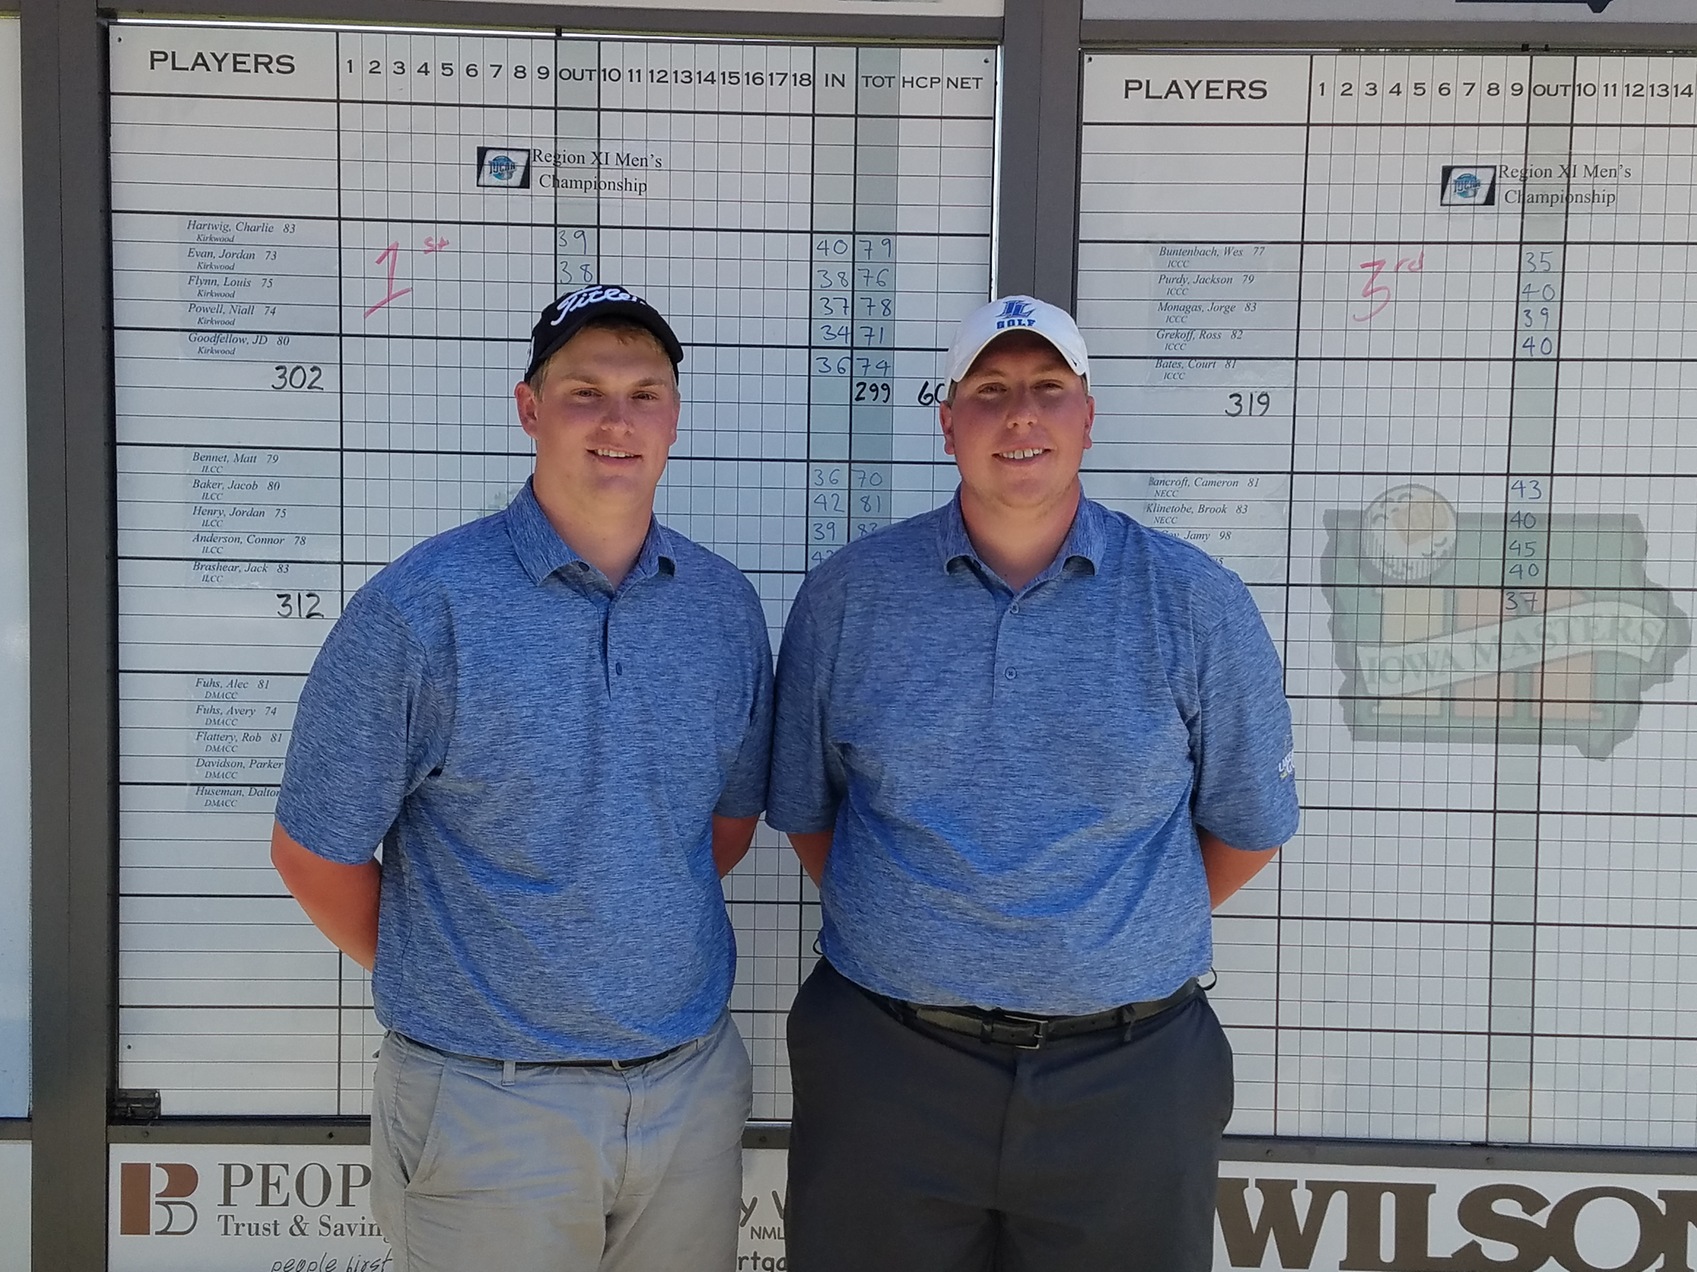 Iowa Lakes Sends Two to Nationals